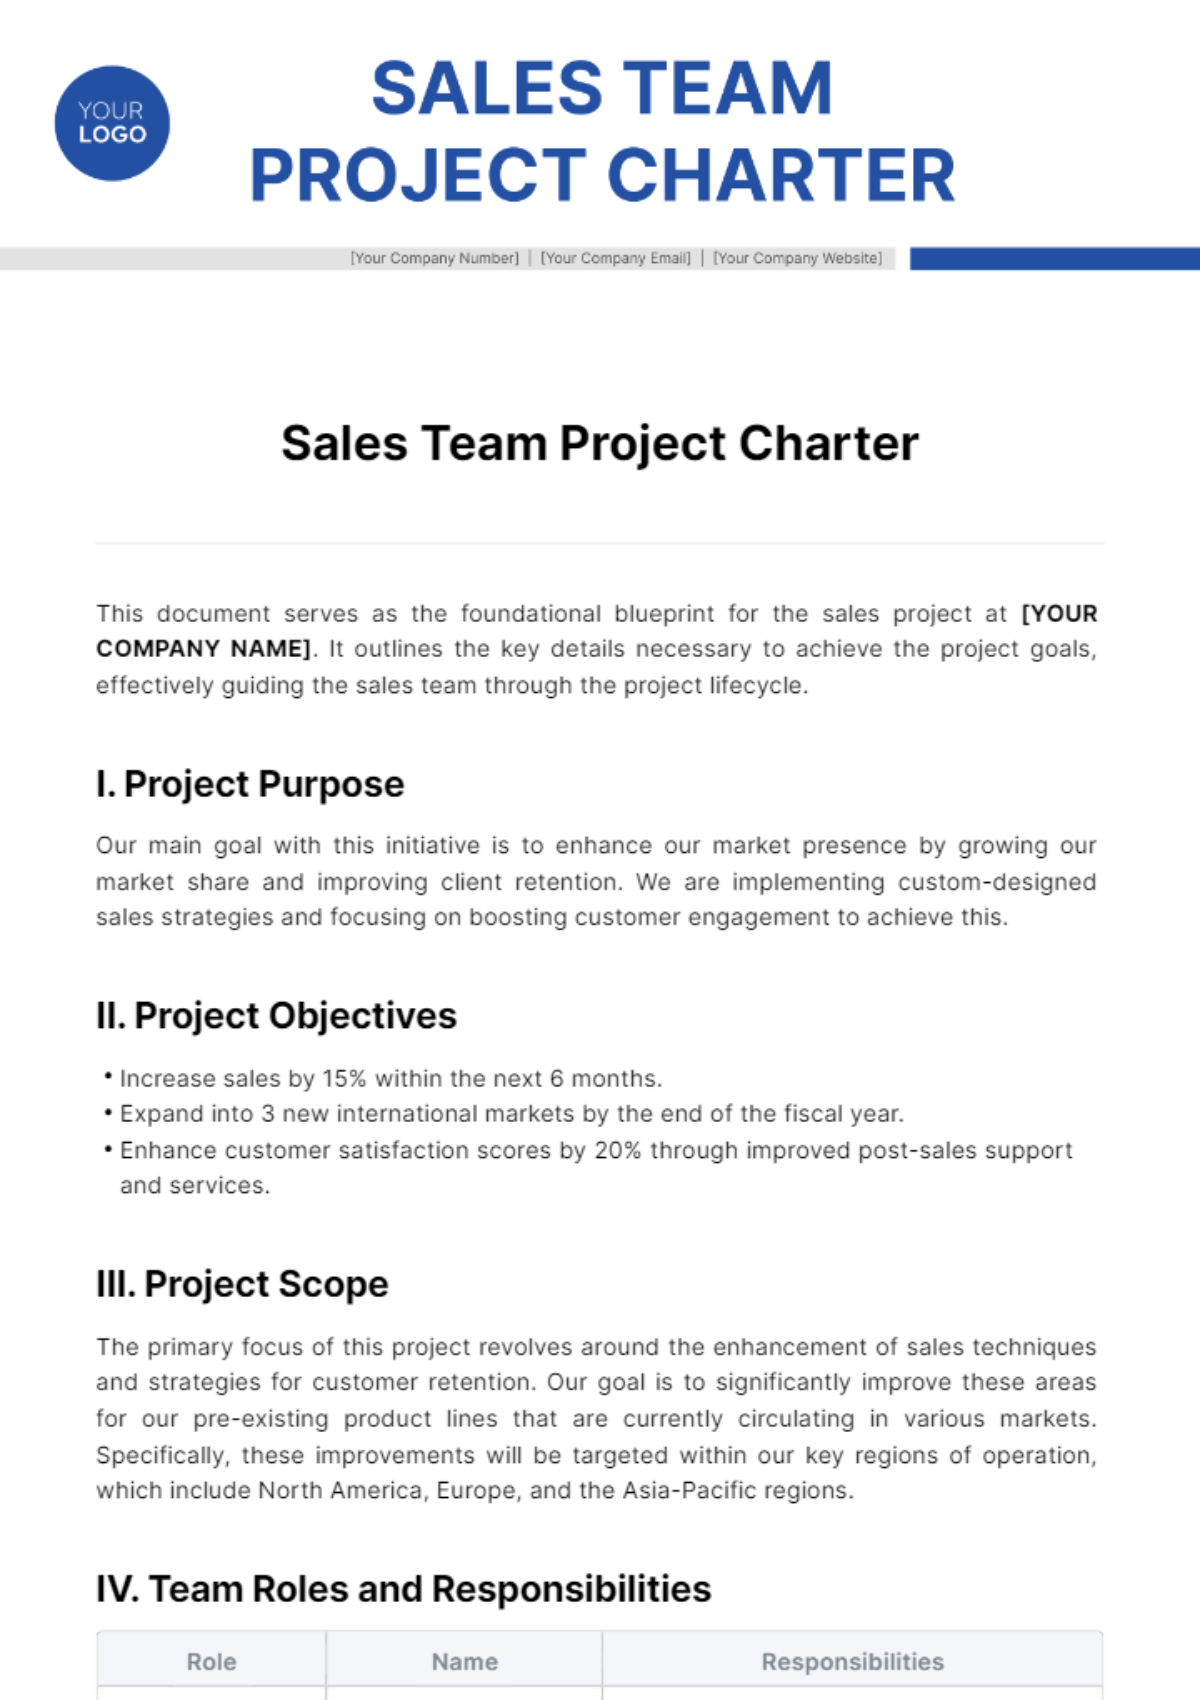 Sales Team Project Charter Template